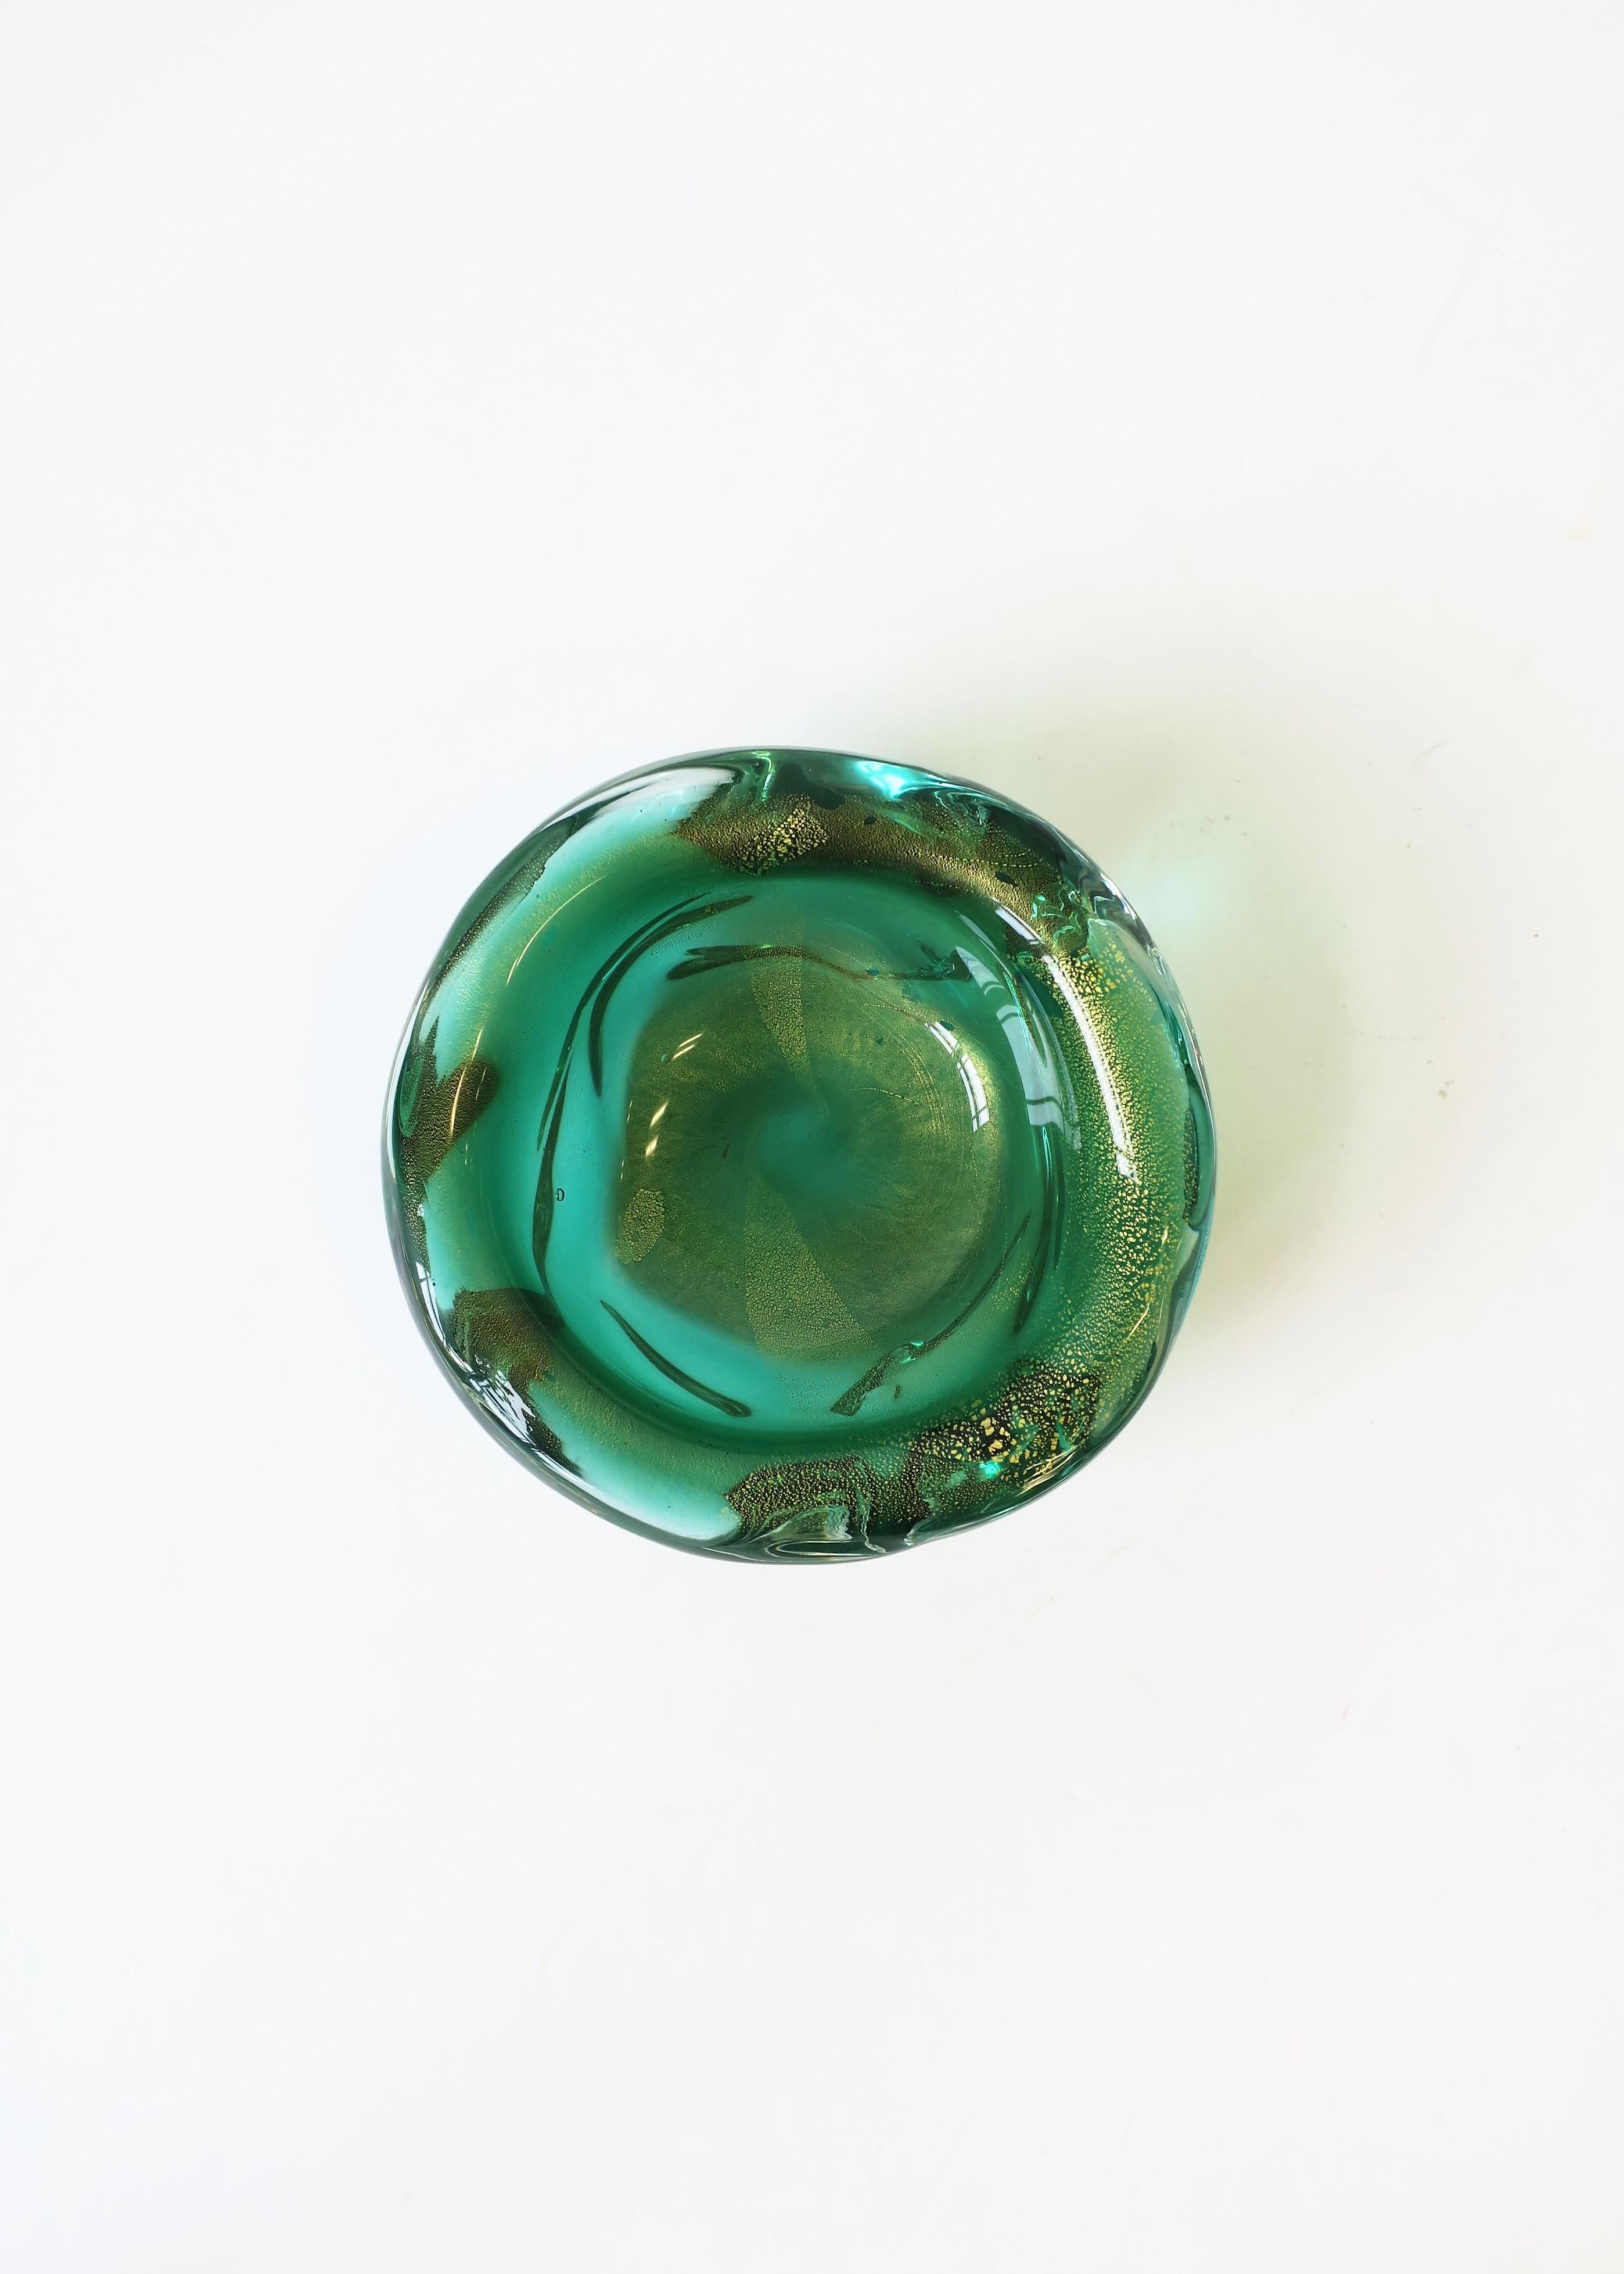 A beautiful and substantial Italian Murano bowl in an Emerald green and gold art glass, with soft edges in an organic modern form/style, circa mid-20th century, Italy. Great as a standalone piece or as a catchall vide-poche on desk, vanity, table,